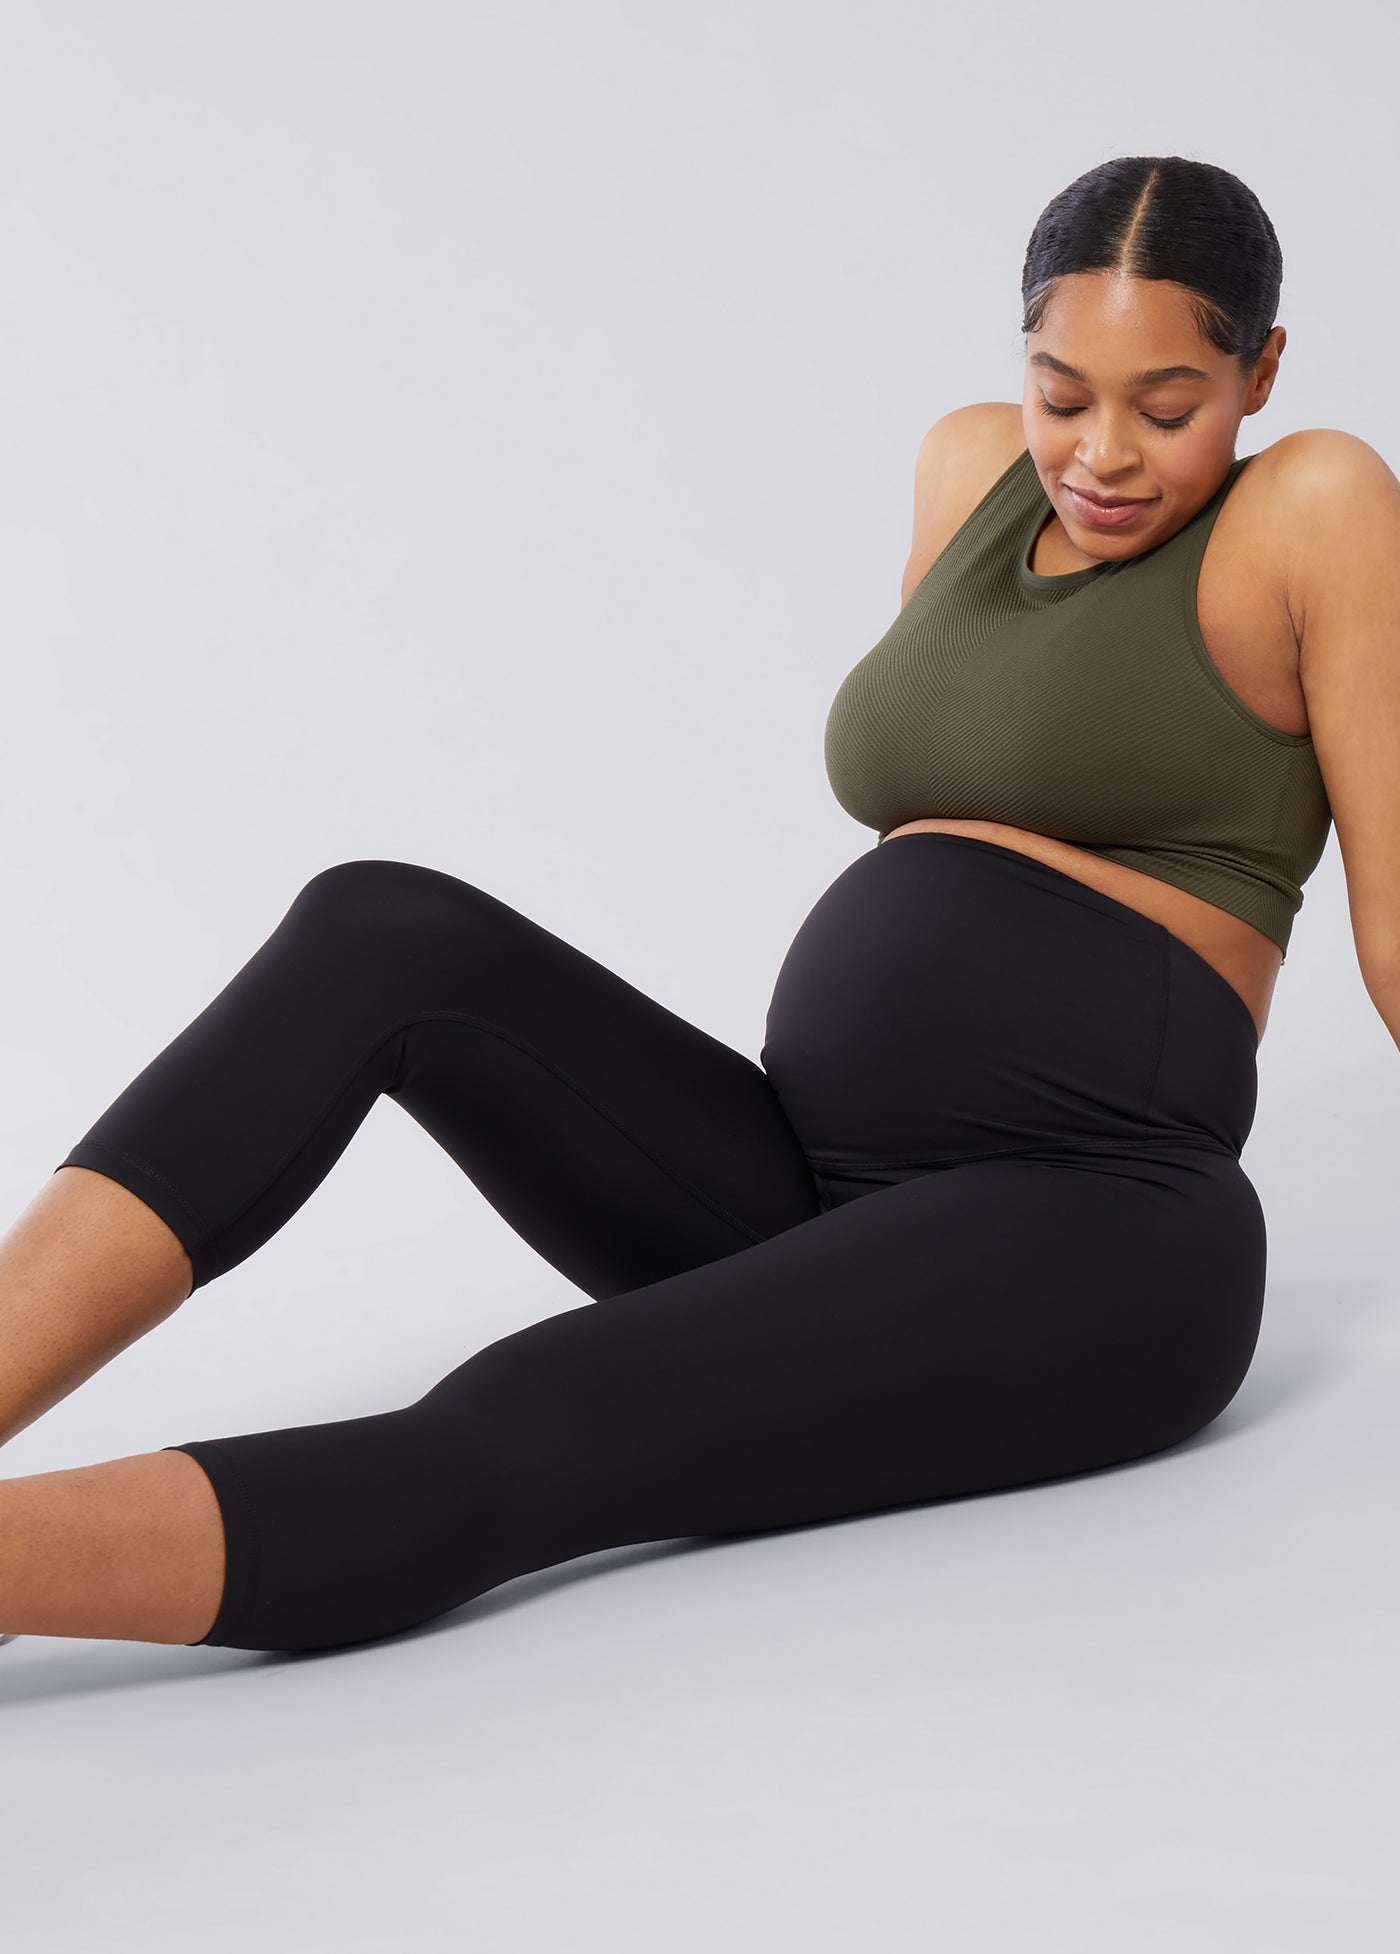 Maternity Capri Leggings - Cropped Style with Supportive Waistband